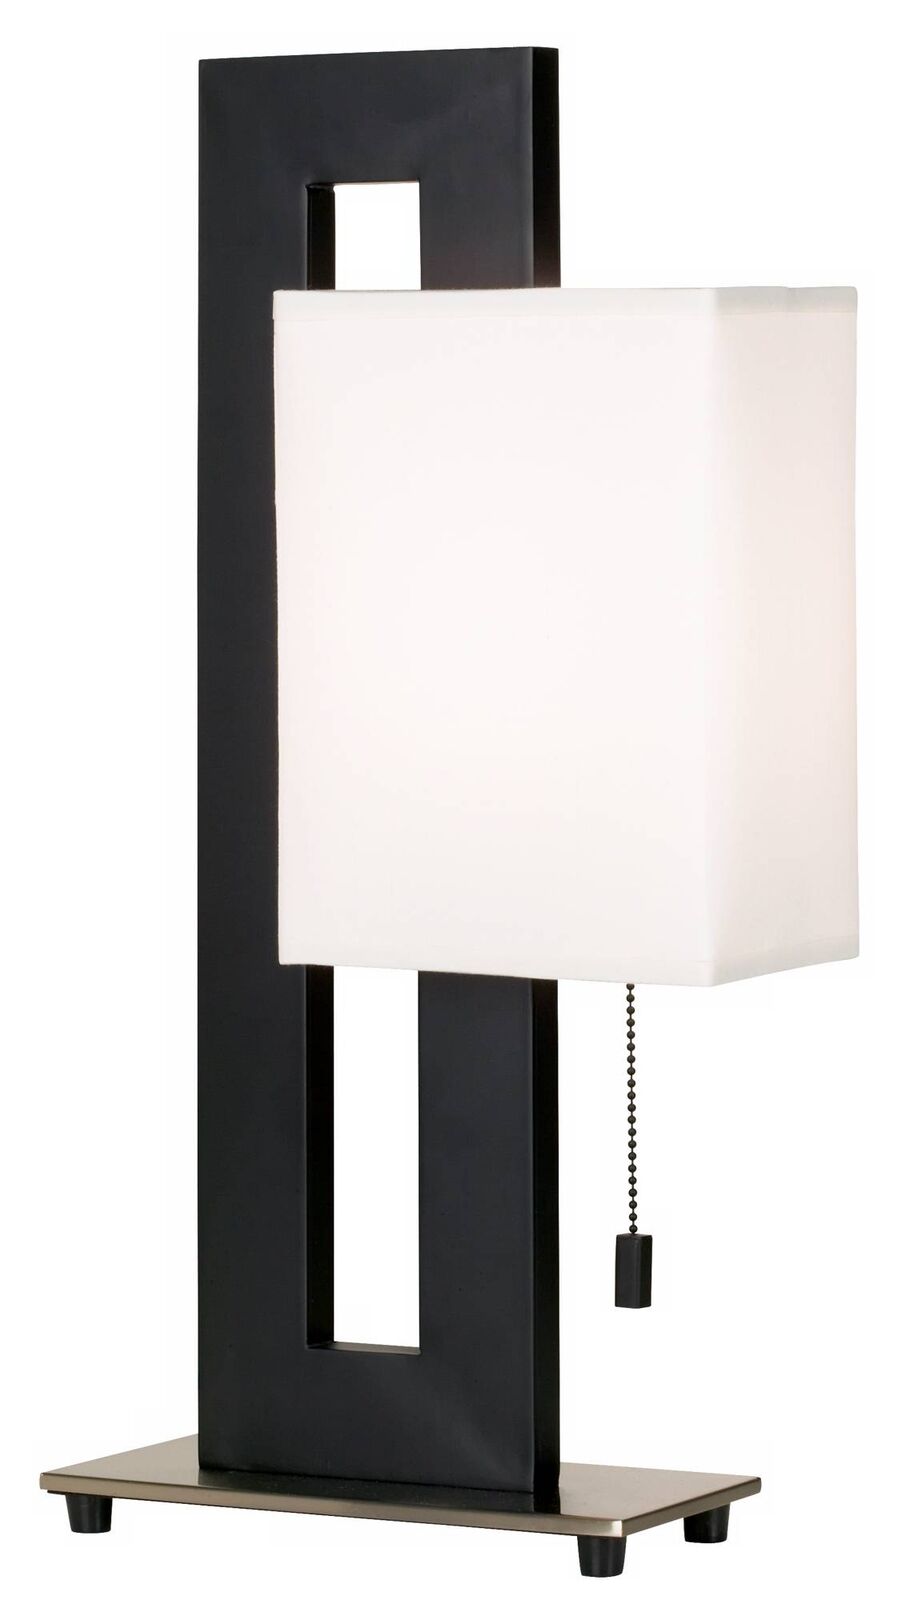 Black Modern Table Lamp With Floating Square Design 20.5 Inches Tall